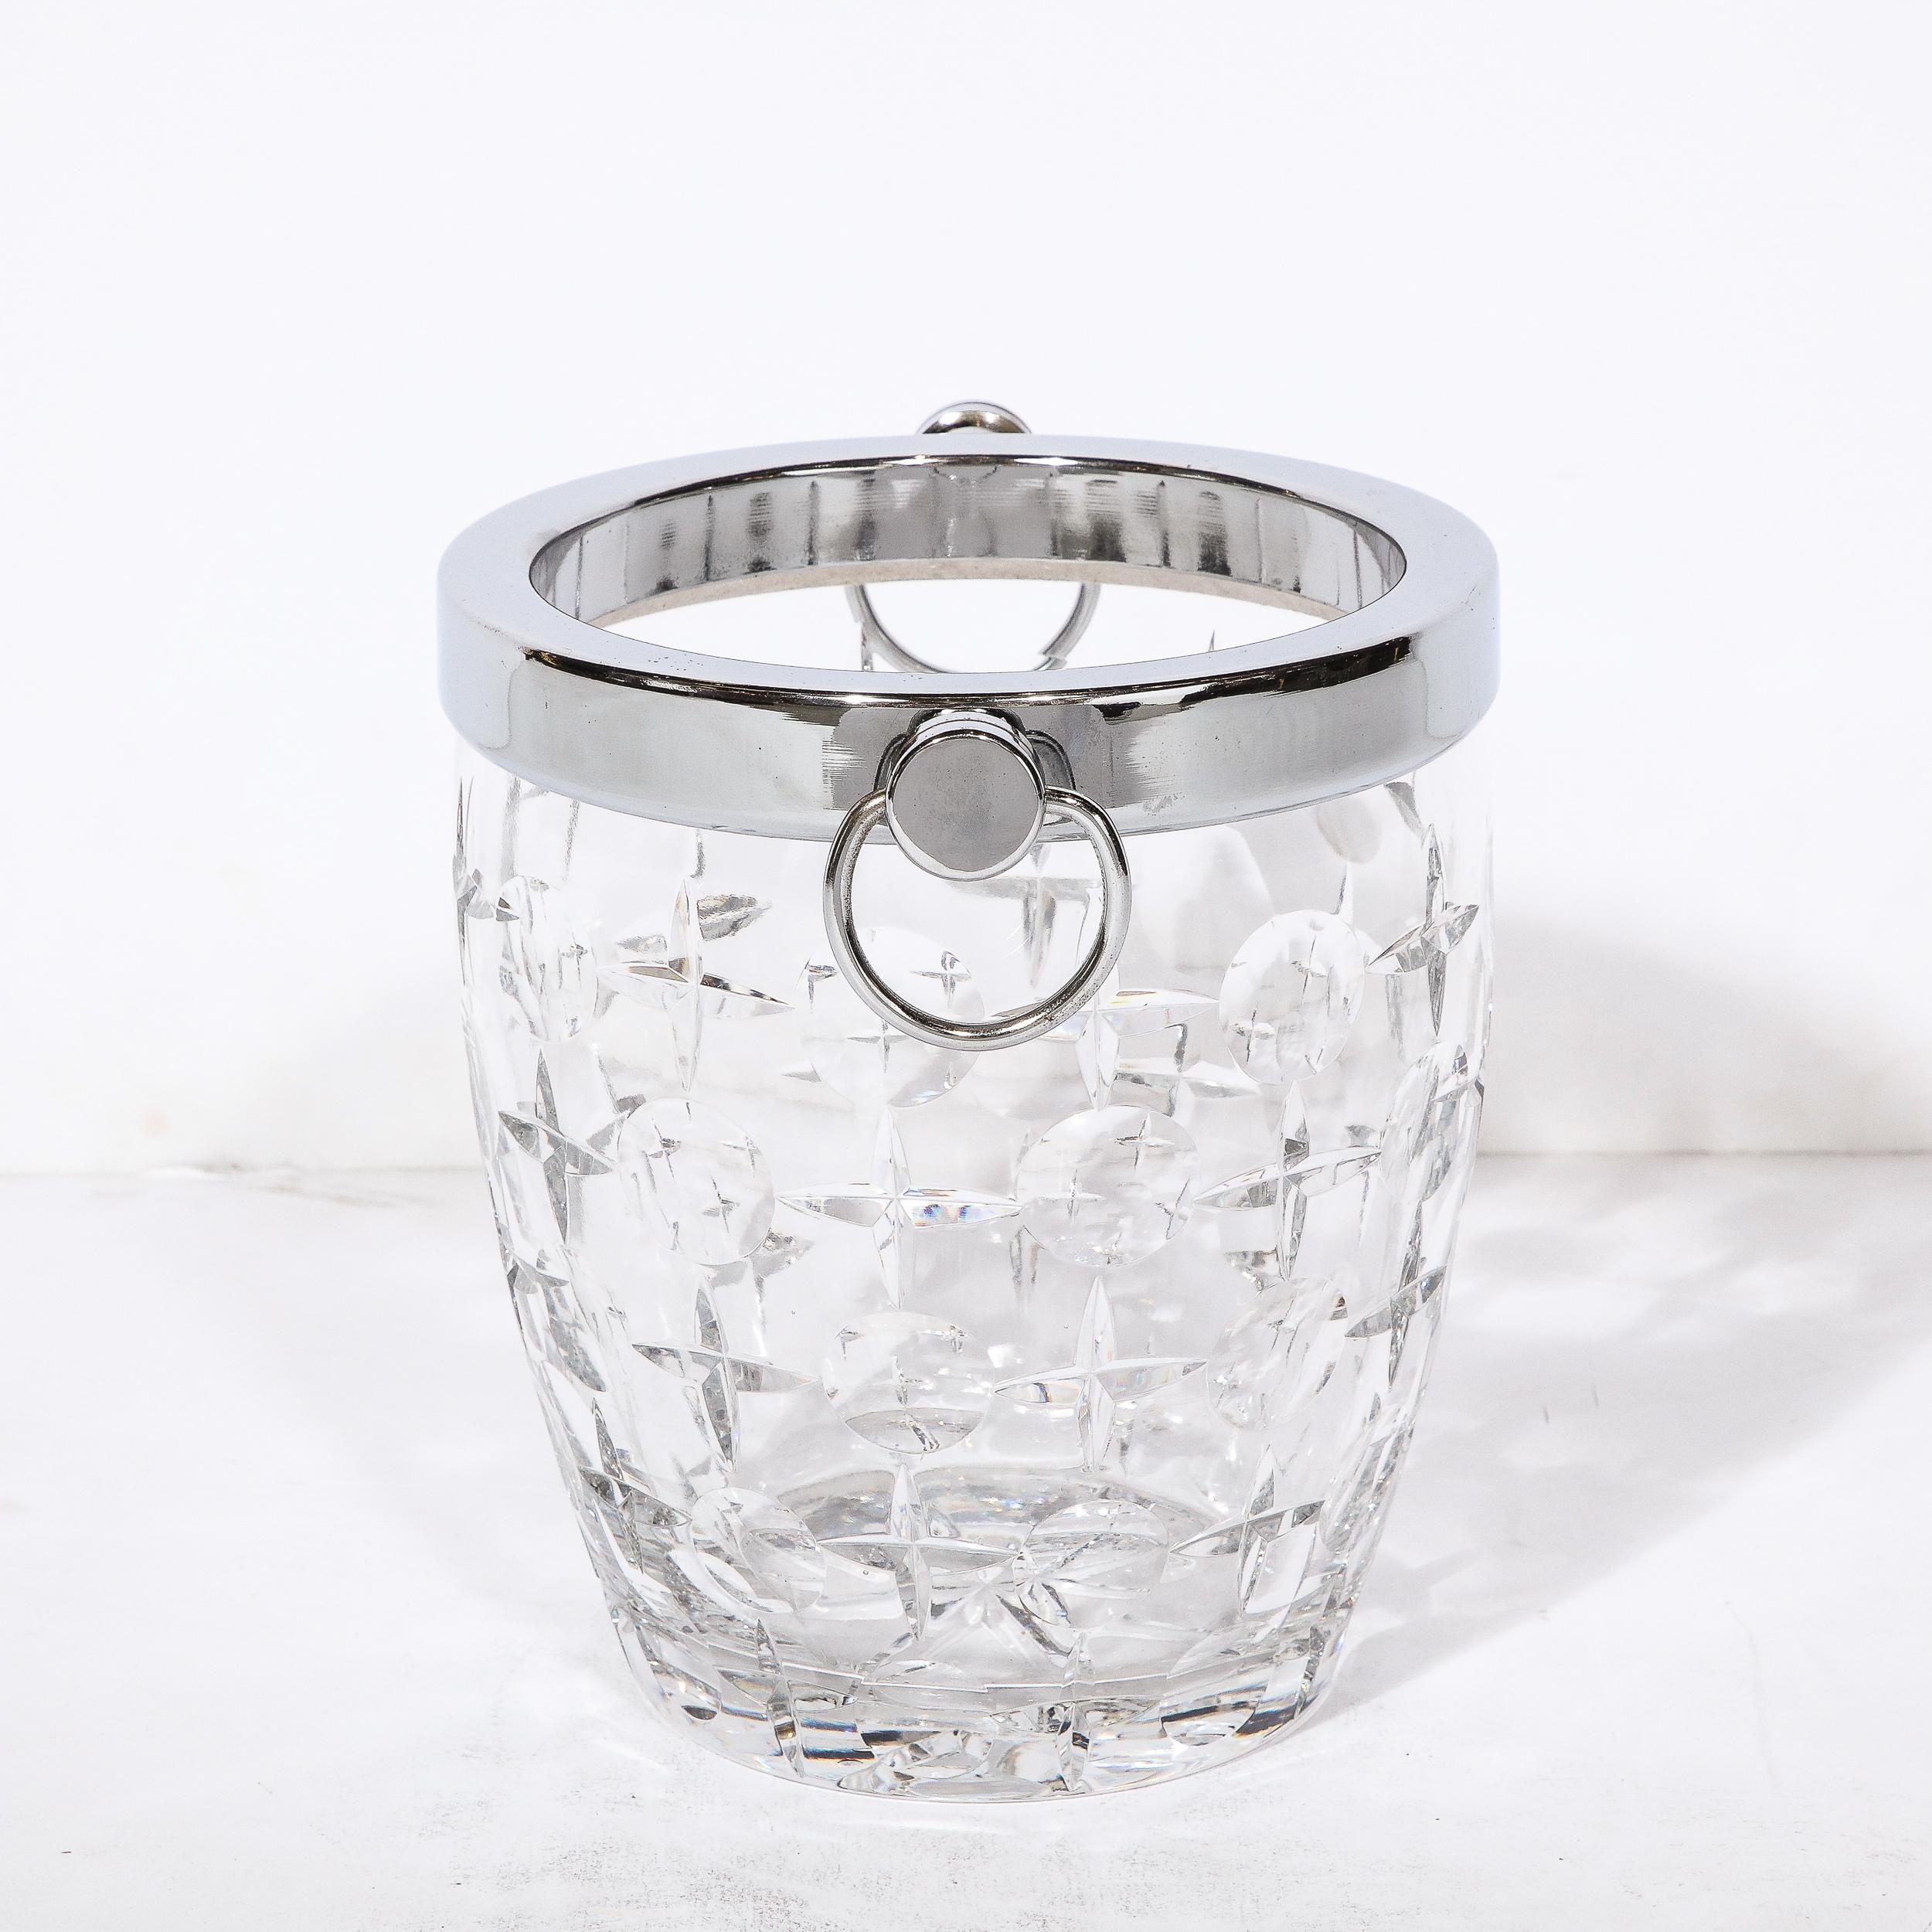 Mid-20th Century Mid-Century Modernist Cut Crystal Ice Bucket with Chrome Fittings & Loop Handles For Sale